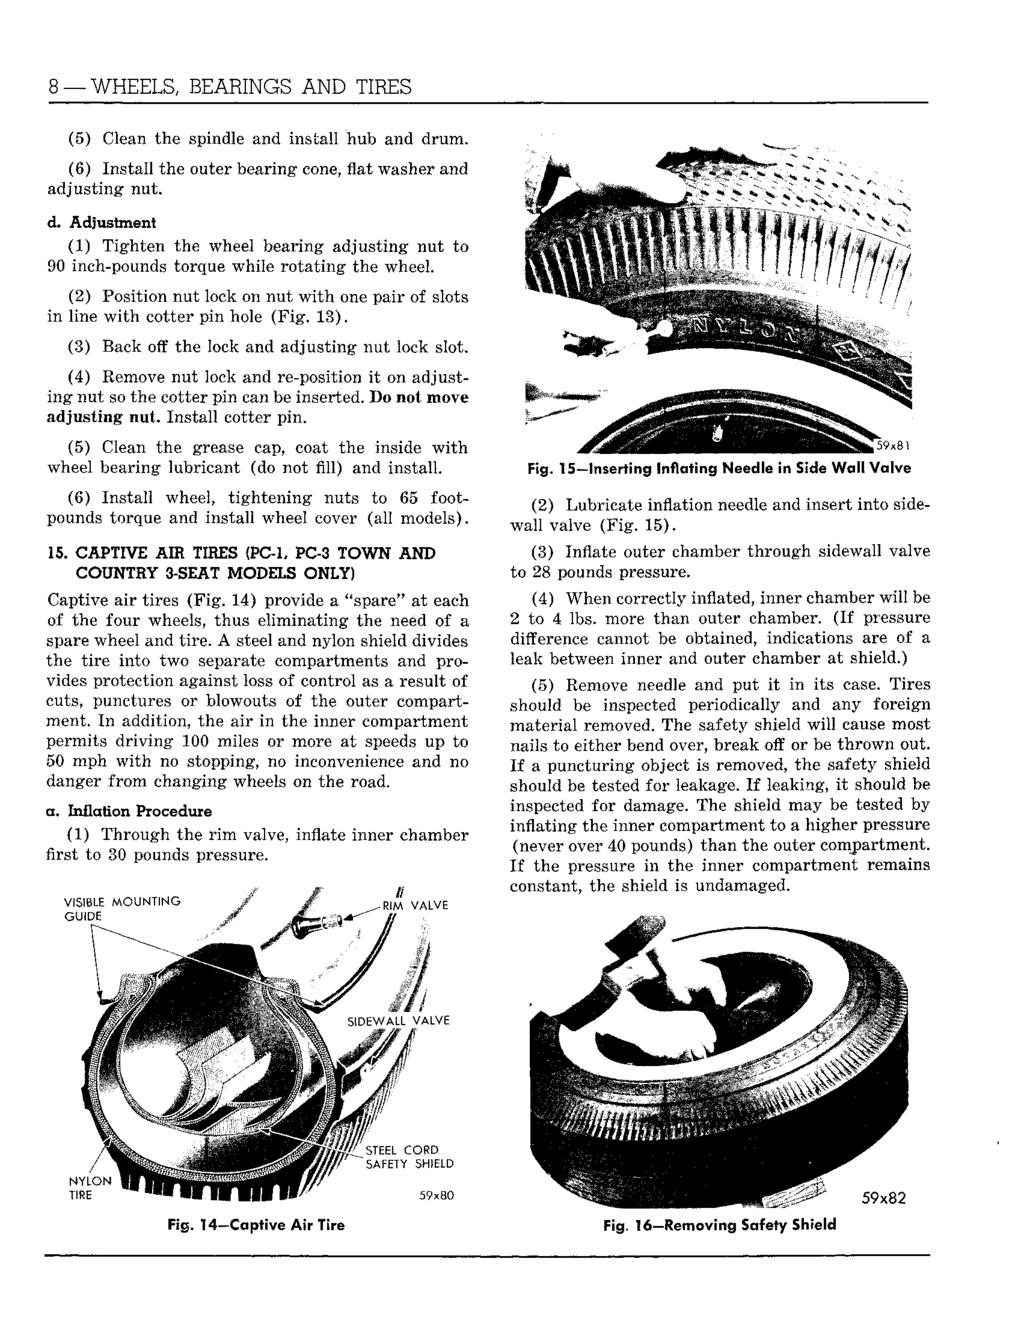 8 WHEELS, BEARINGS AND TIRES (5) Clean the spindle and install hub and drum. (6) Install the outer bearing cone, flat washer and adjusting nut. d. Adjustment (1) Tighten the wheel bearing adjusting nut to 90 inch-pounds torque while rotating the wheel.